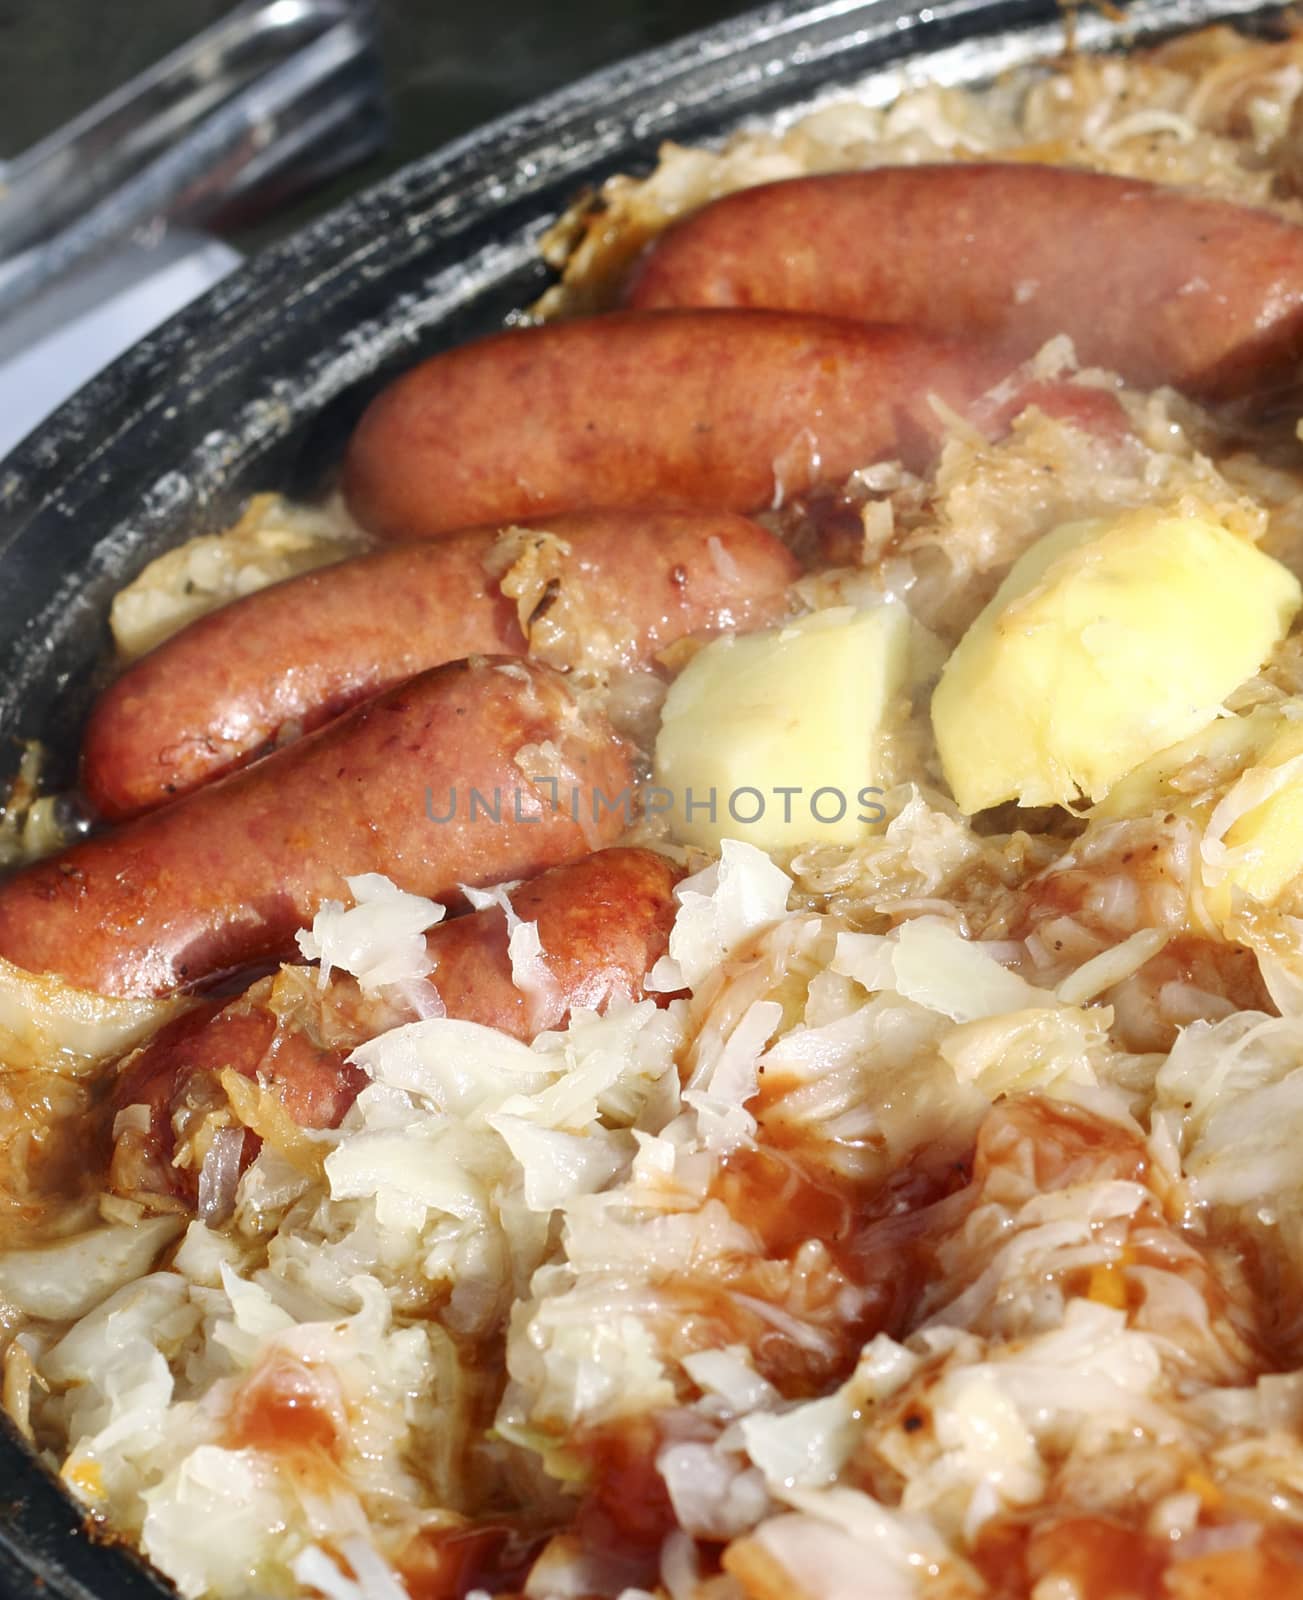 Smoked  sausage with stewed cabbage by openas